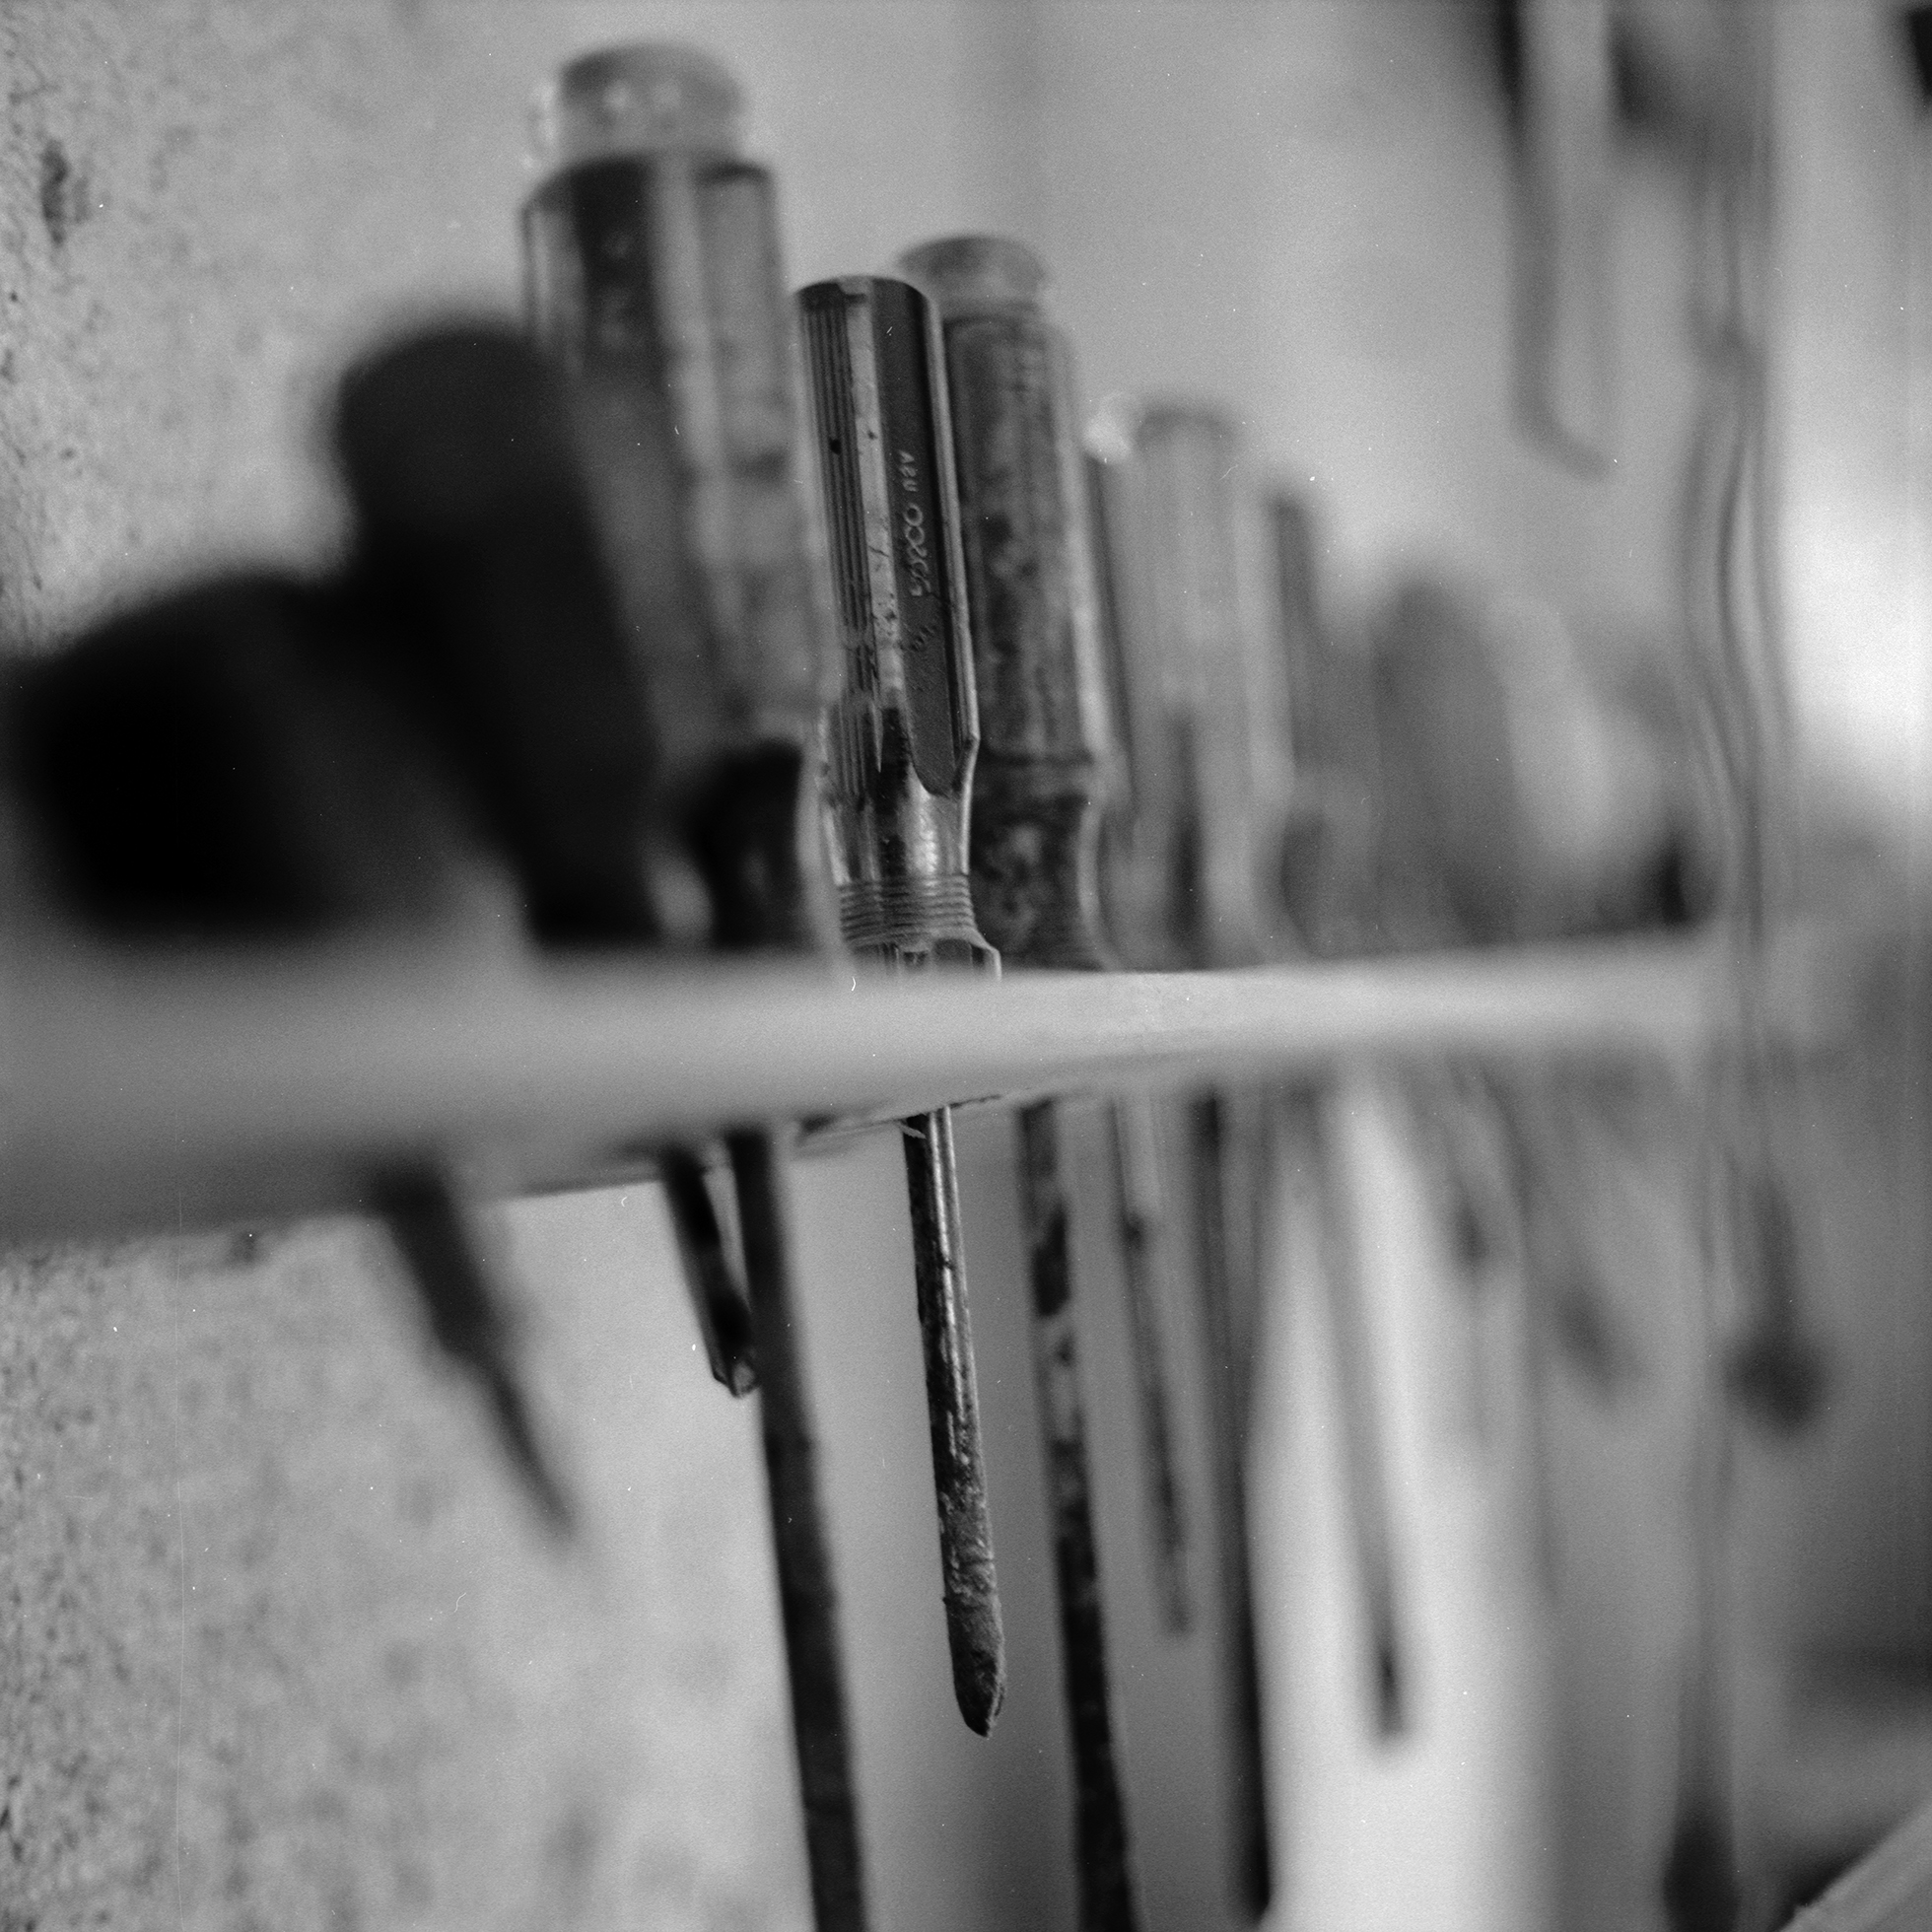 Well-used tools, each in its own hole, are stored along a narrow wooden strip attached to a wall. The screwdrivers in the foreground are in focus, while the rest of the tools are blurred.